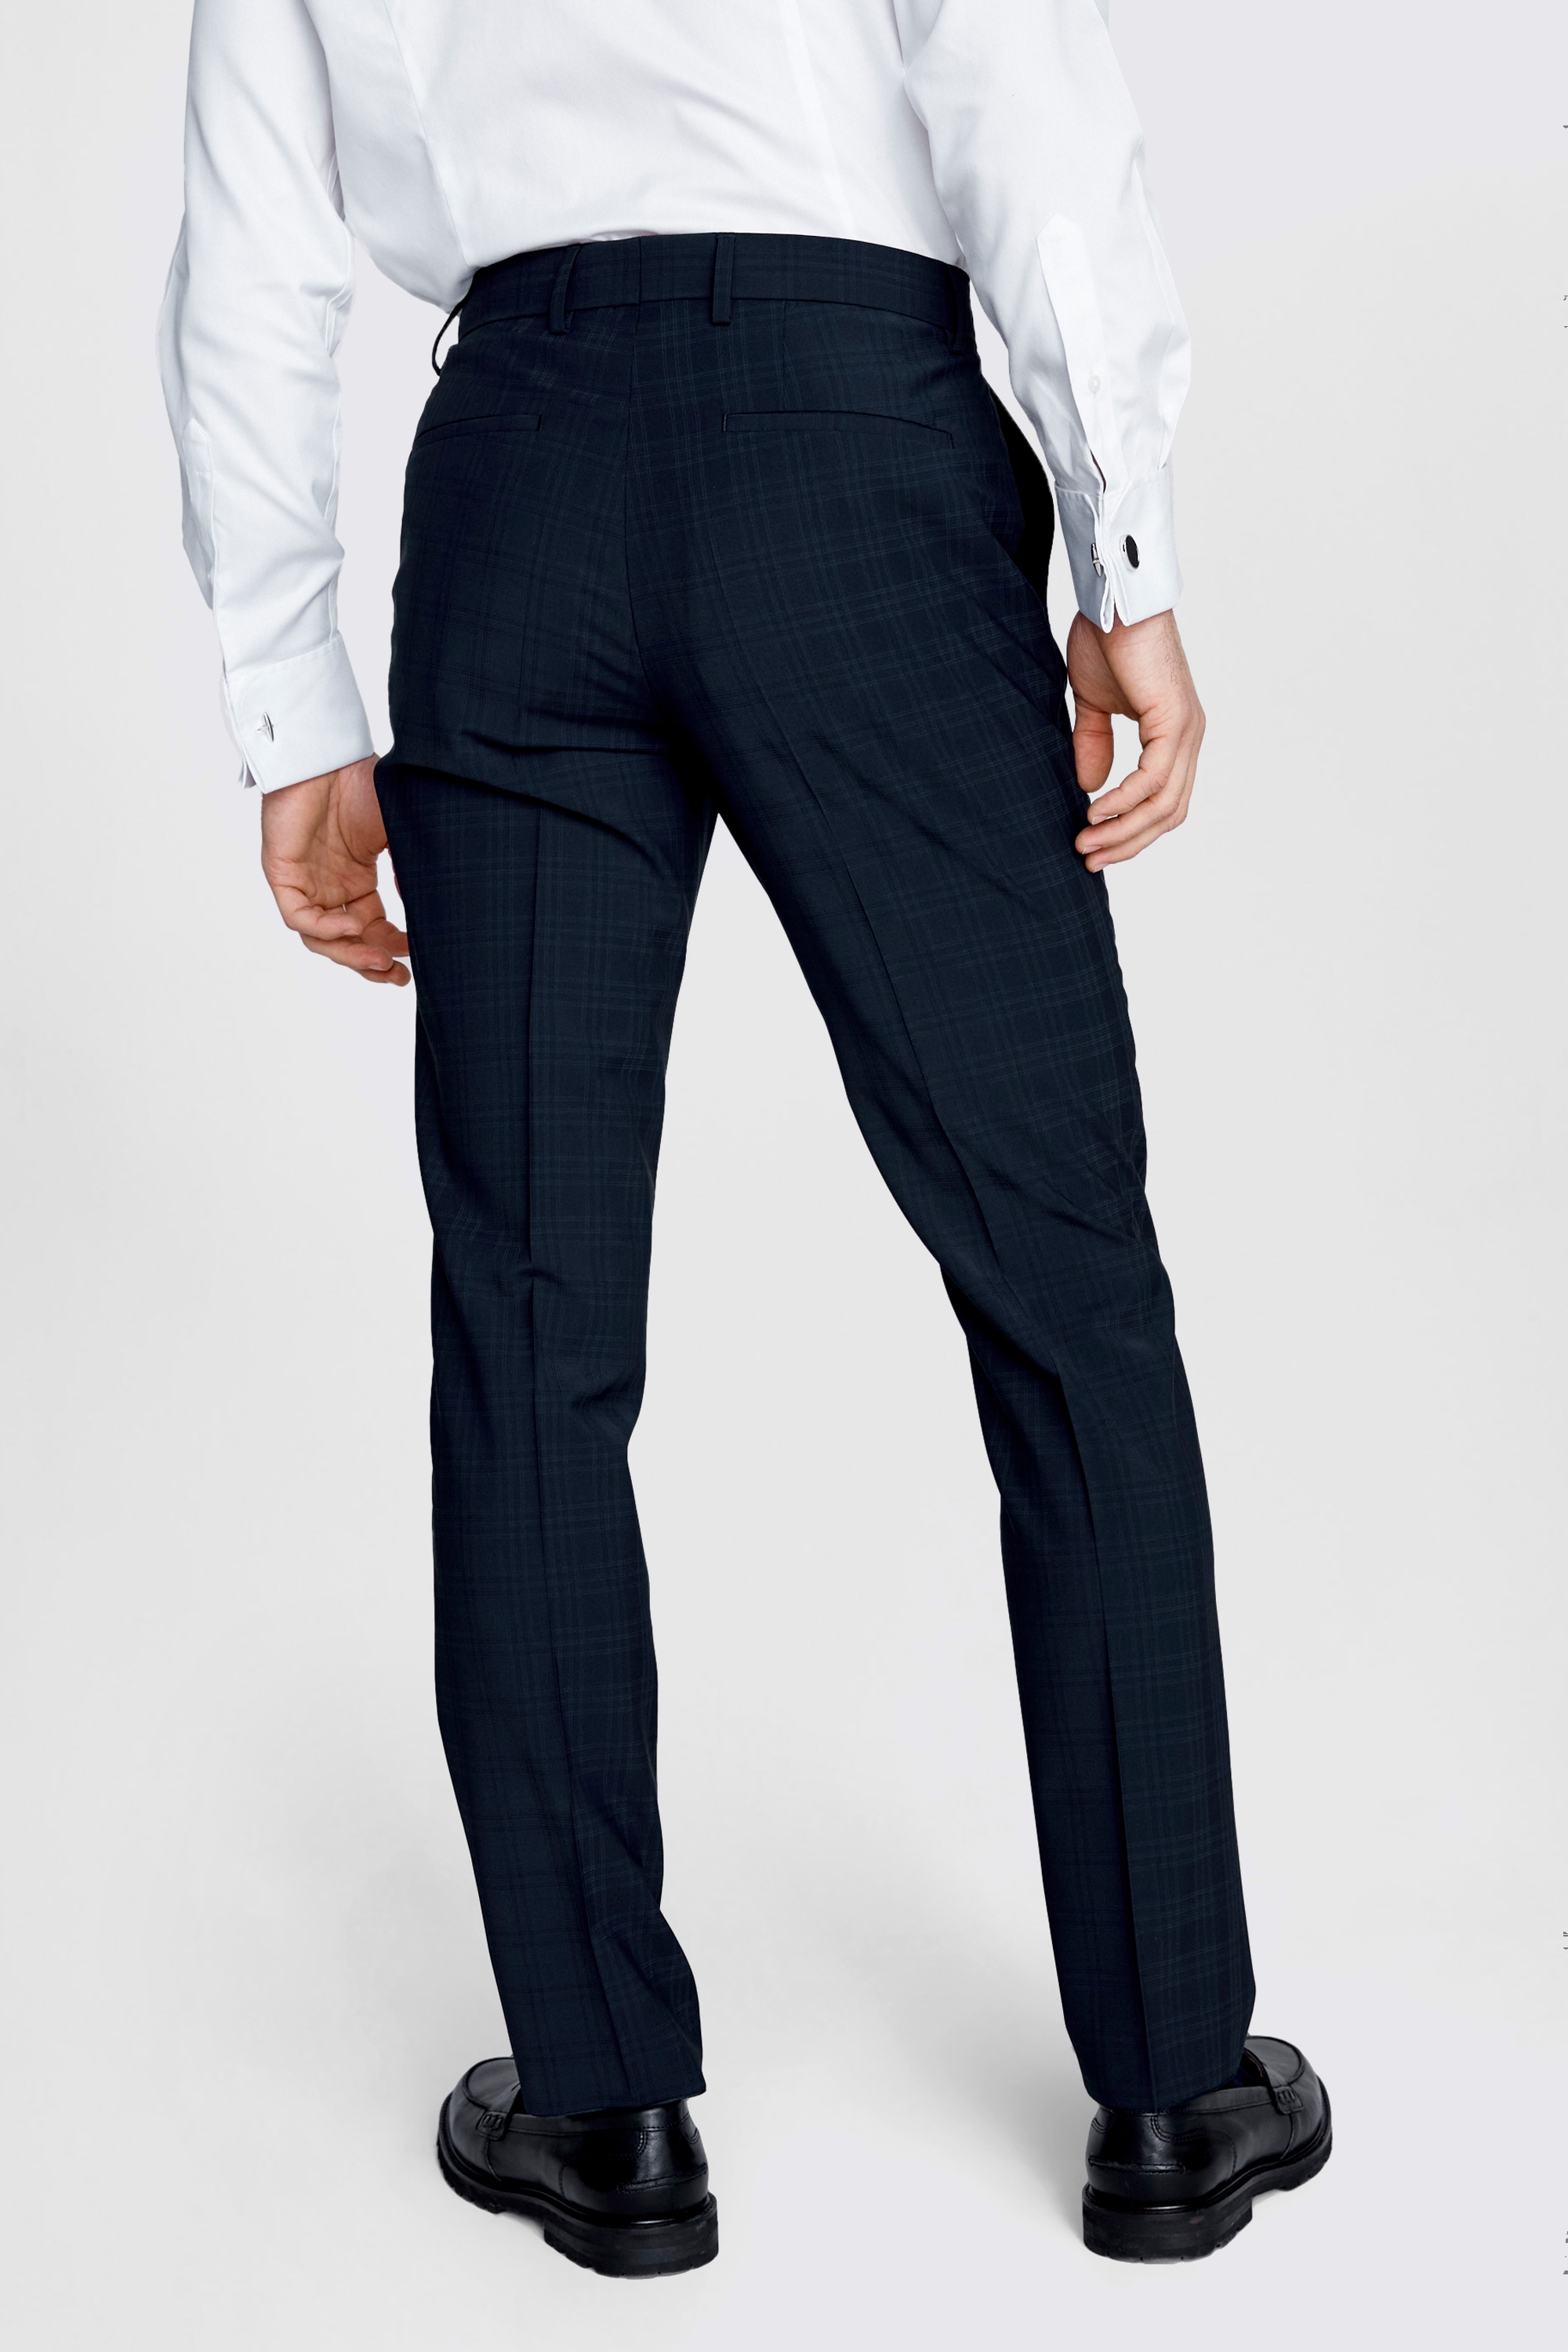 Slim Fit Navy Check Trousers | Buy Online at Moss